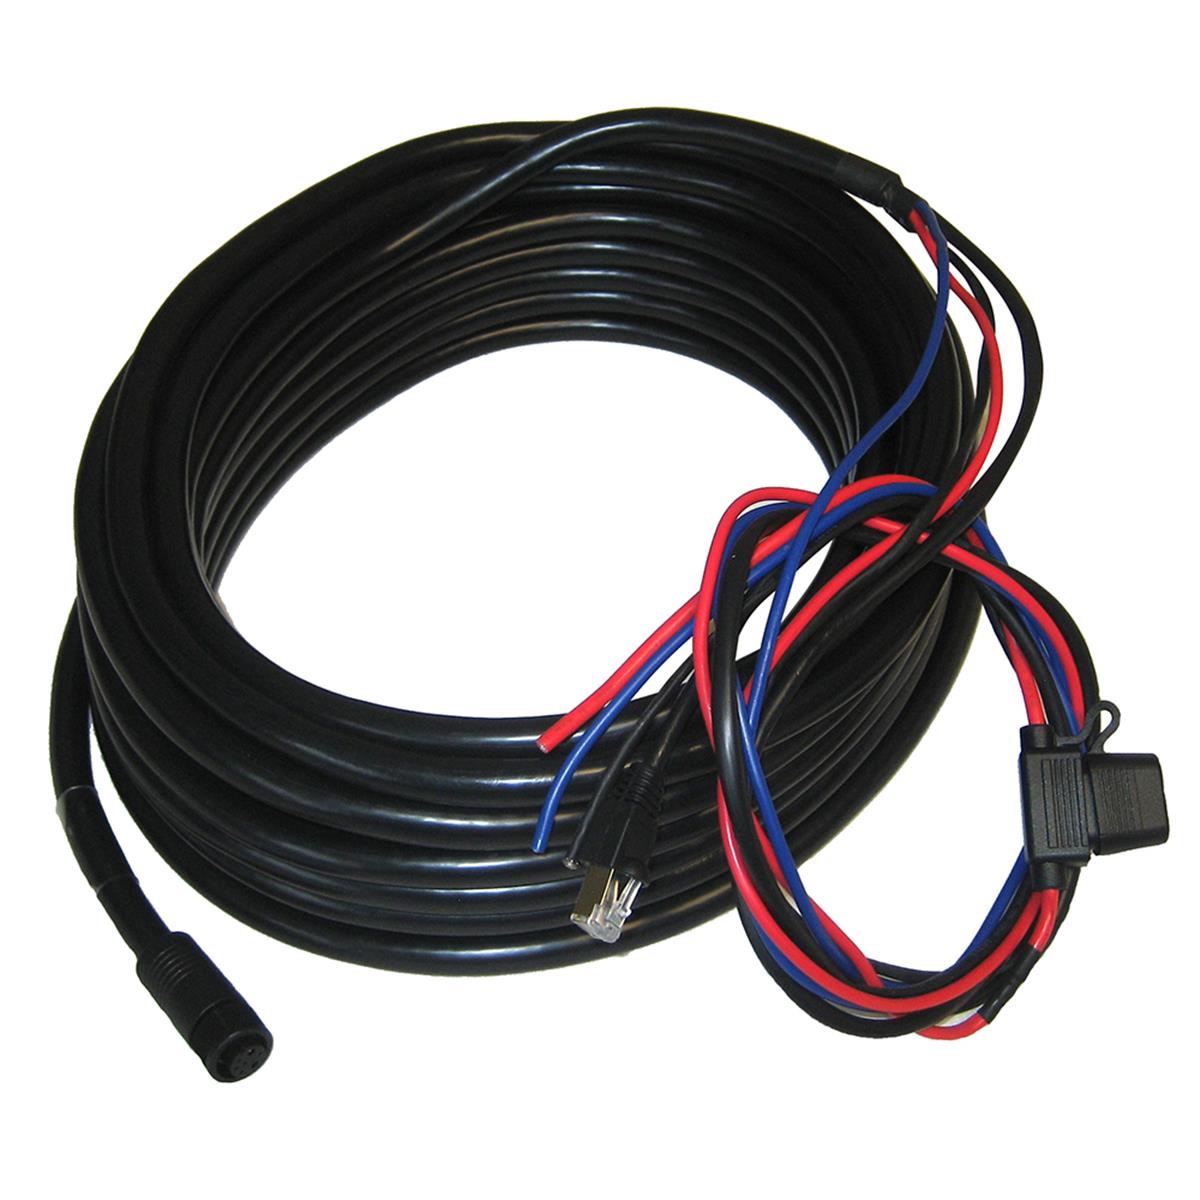 Picture of Furuno 001-512-620-00 15 m Furuno DRS Signal & Power Cable